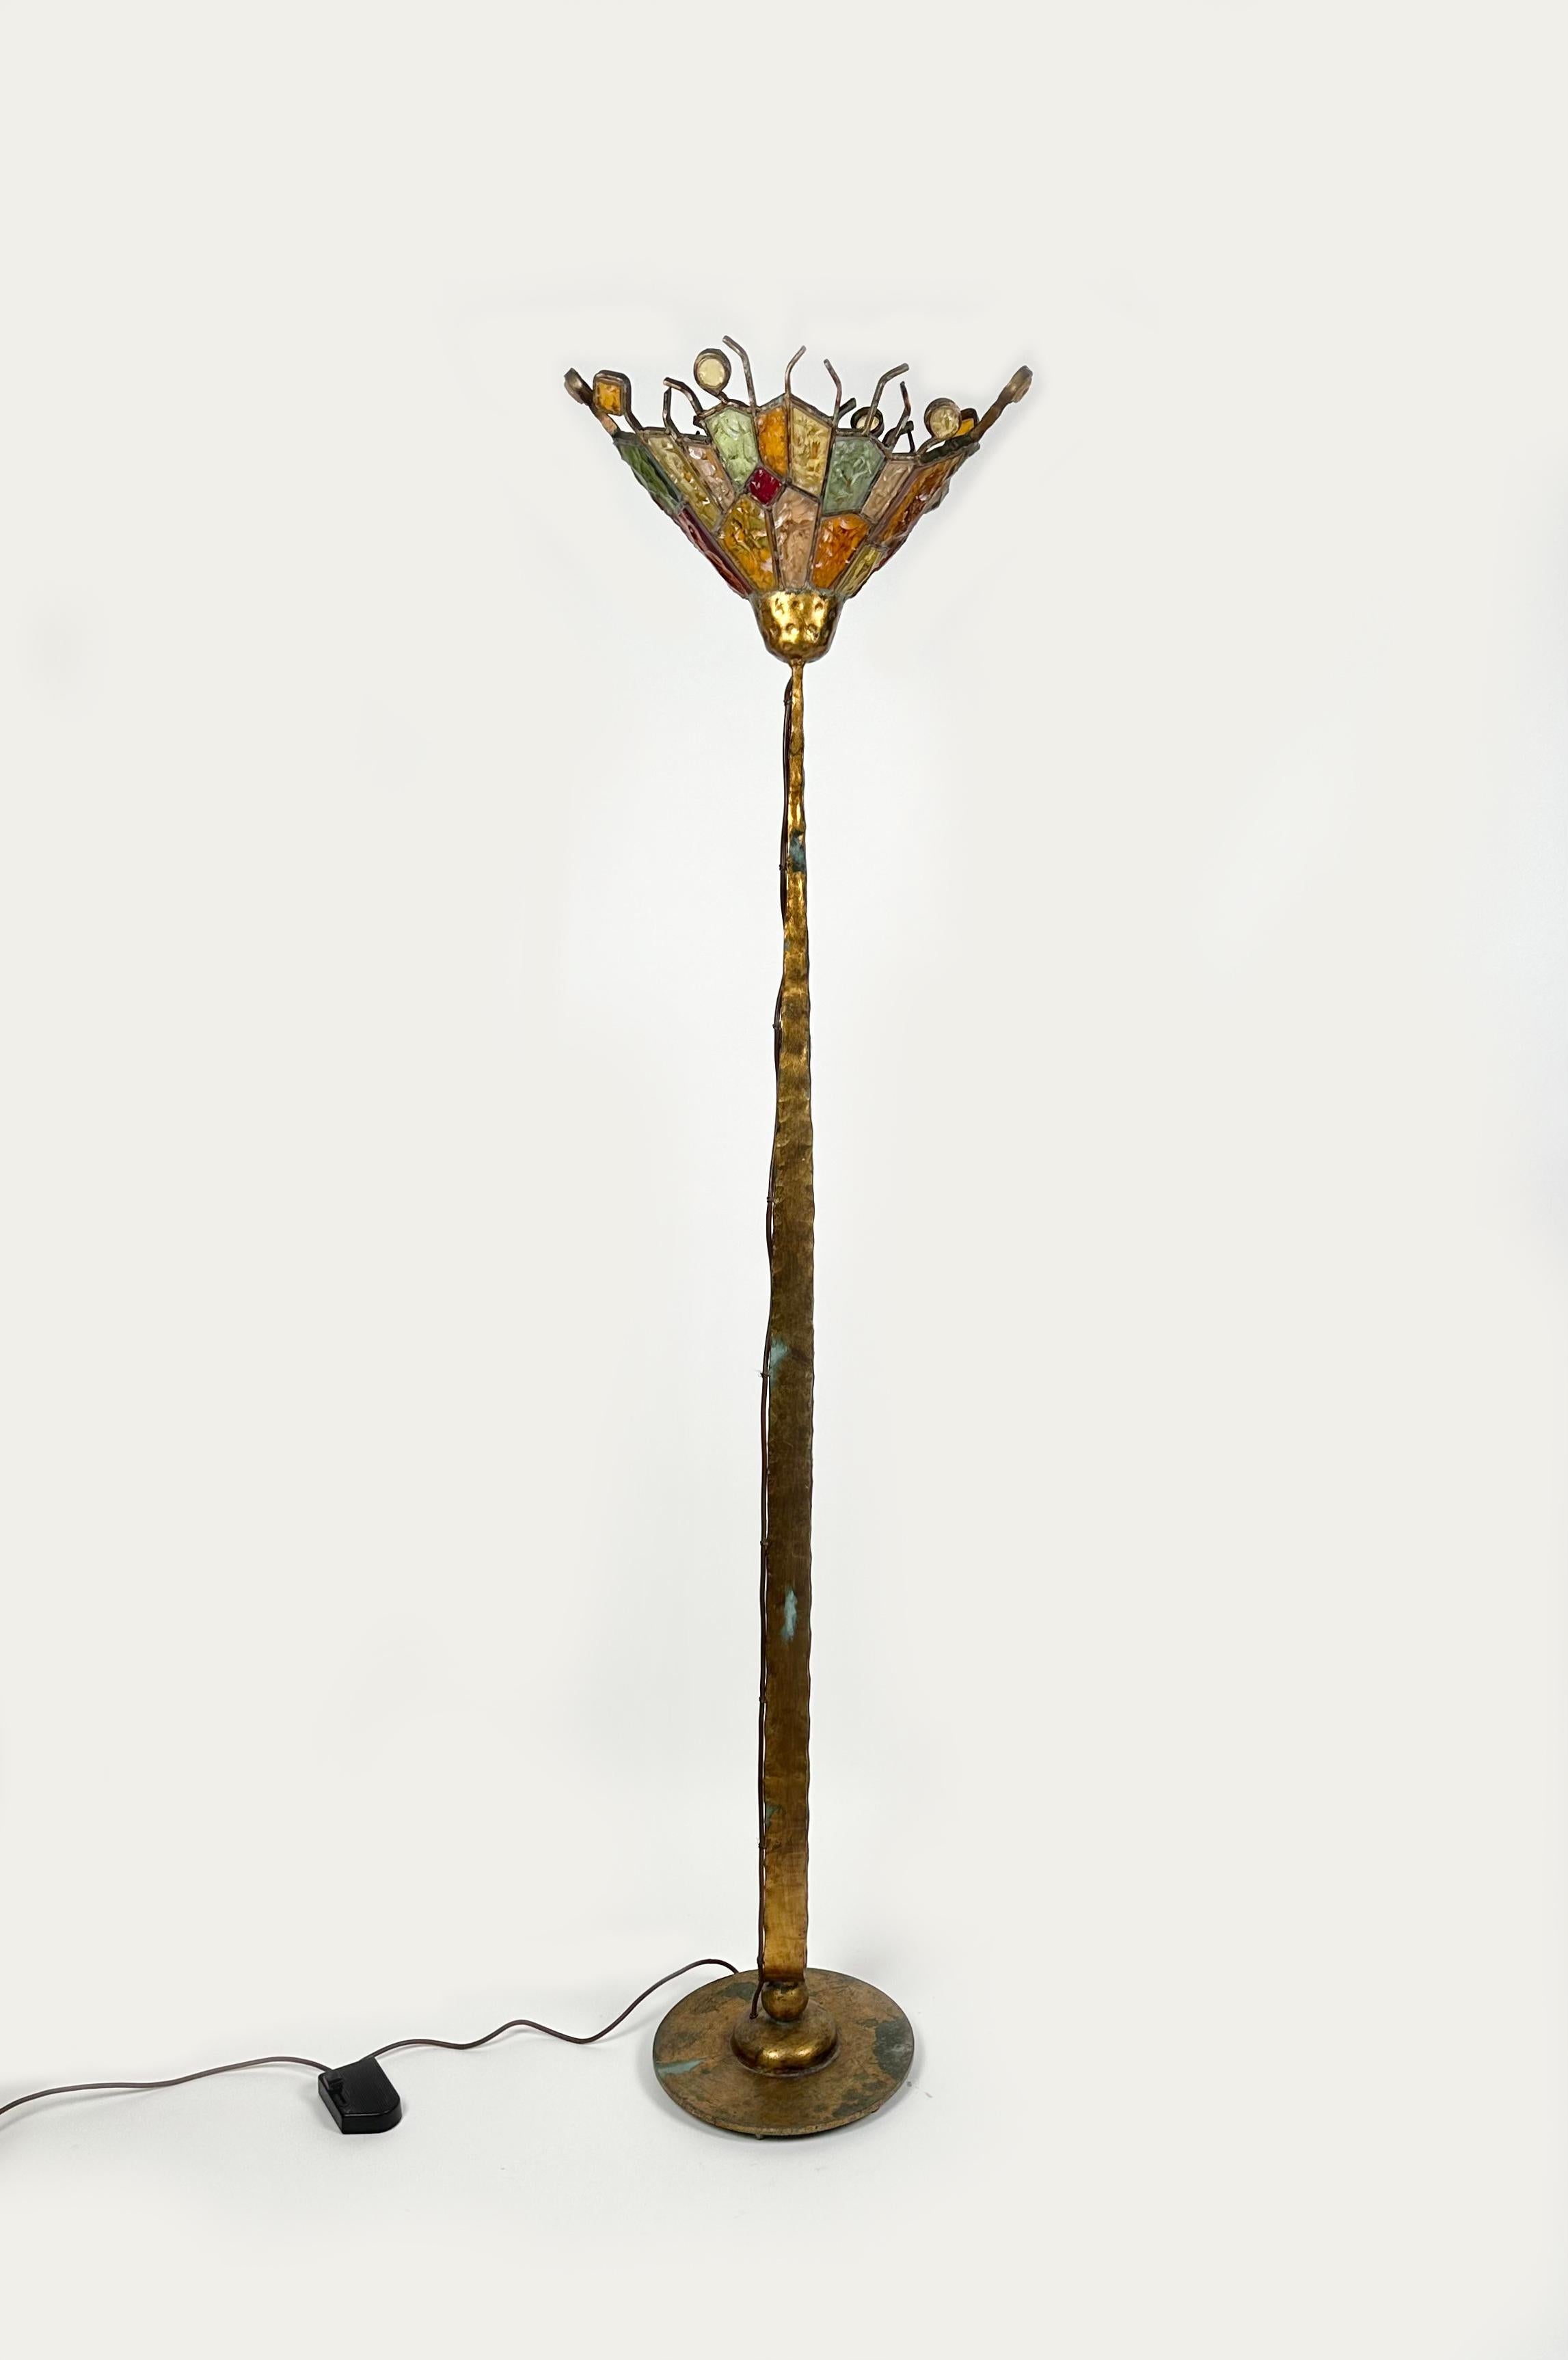 Brutalist Iron and Art Glass Floor Lamp Albano Poli for Poliarte, Italy 1970s For Sale 1